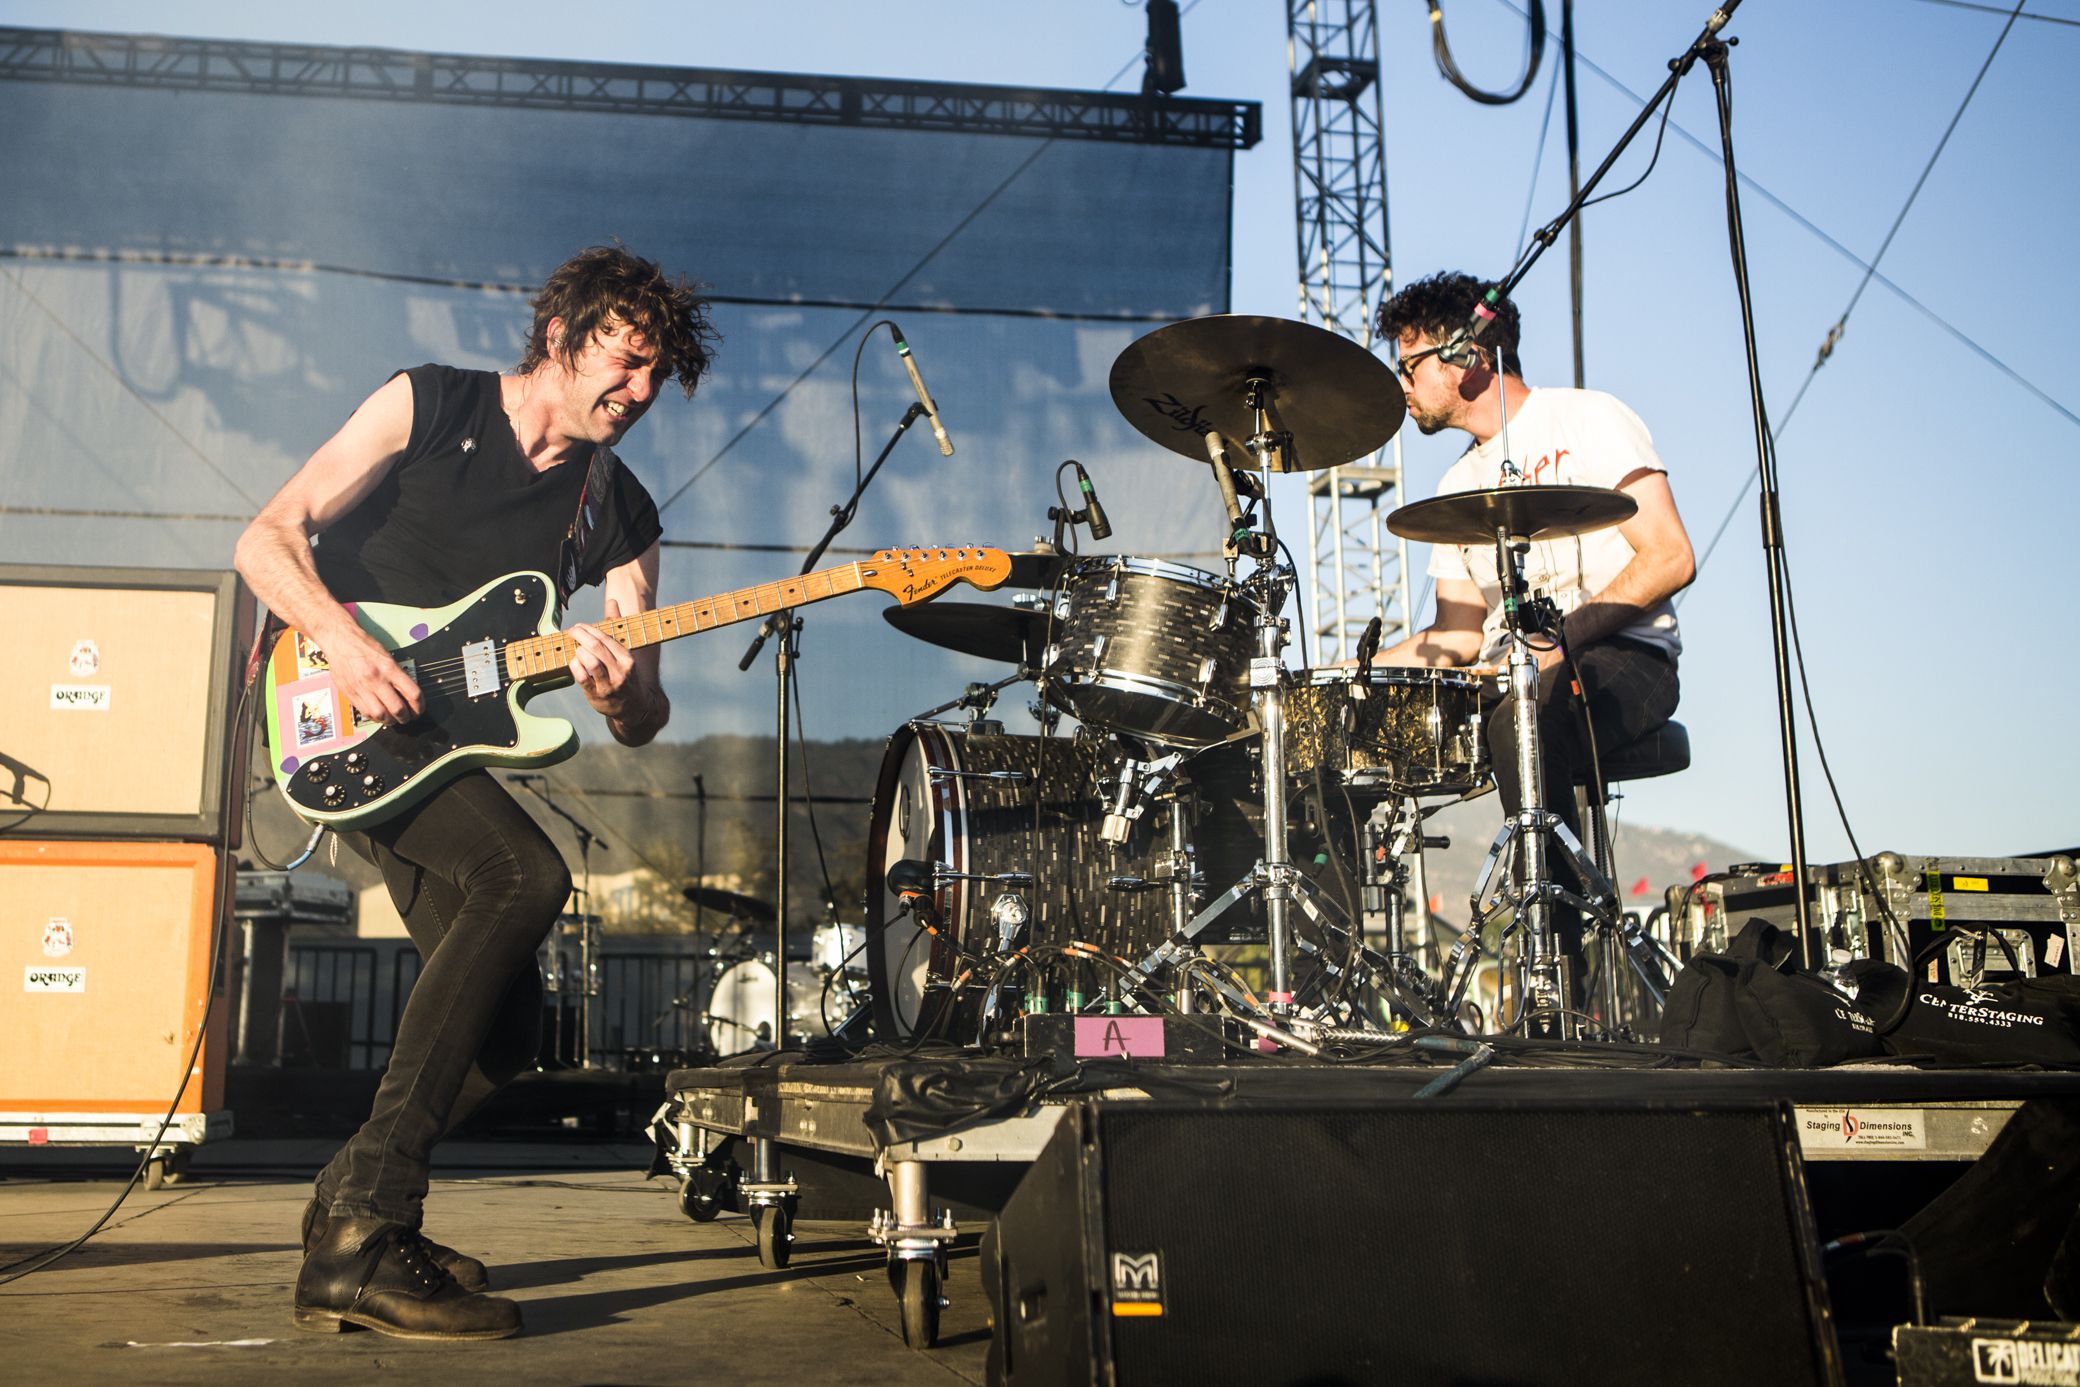 japandroids 1 Cal Jam Offered Everything Youd Want From Dave Grohl